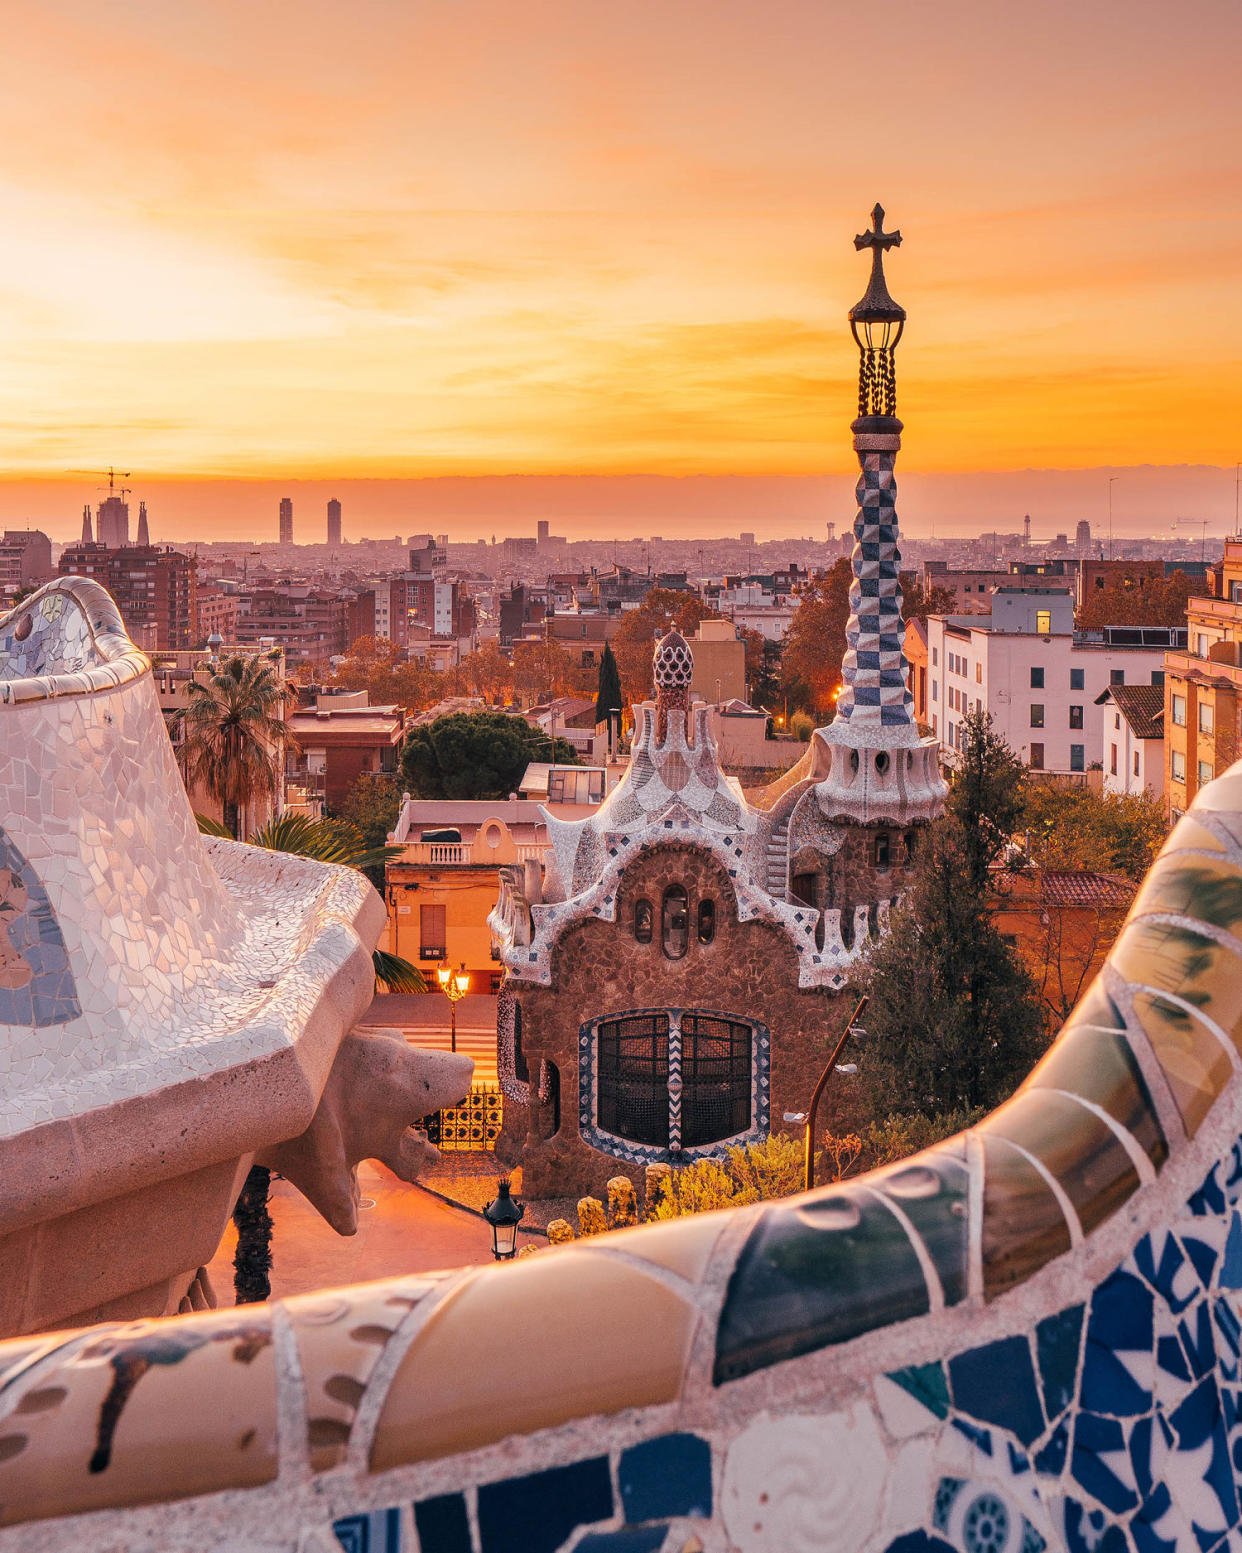 View of the city from Park Guell in Barcelona, Spain. (Pol Albarrán / Getty Images)